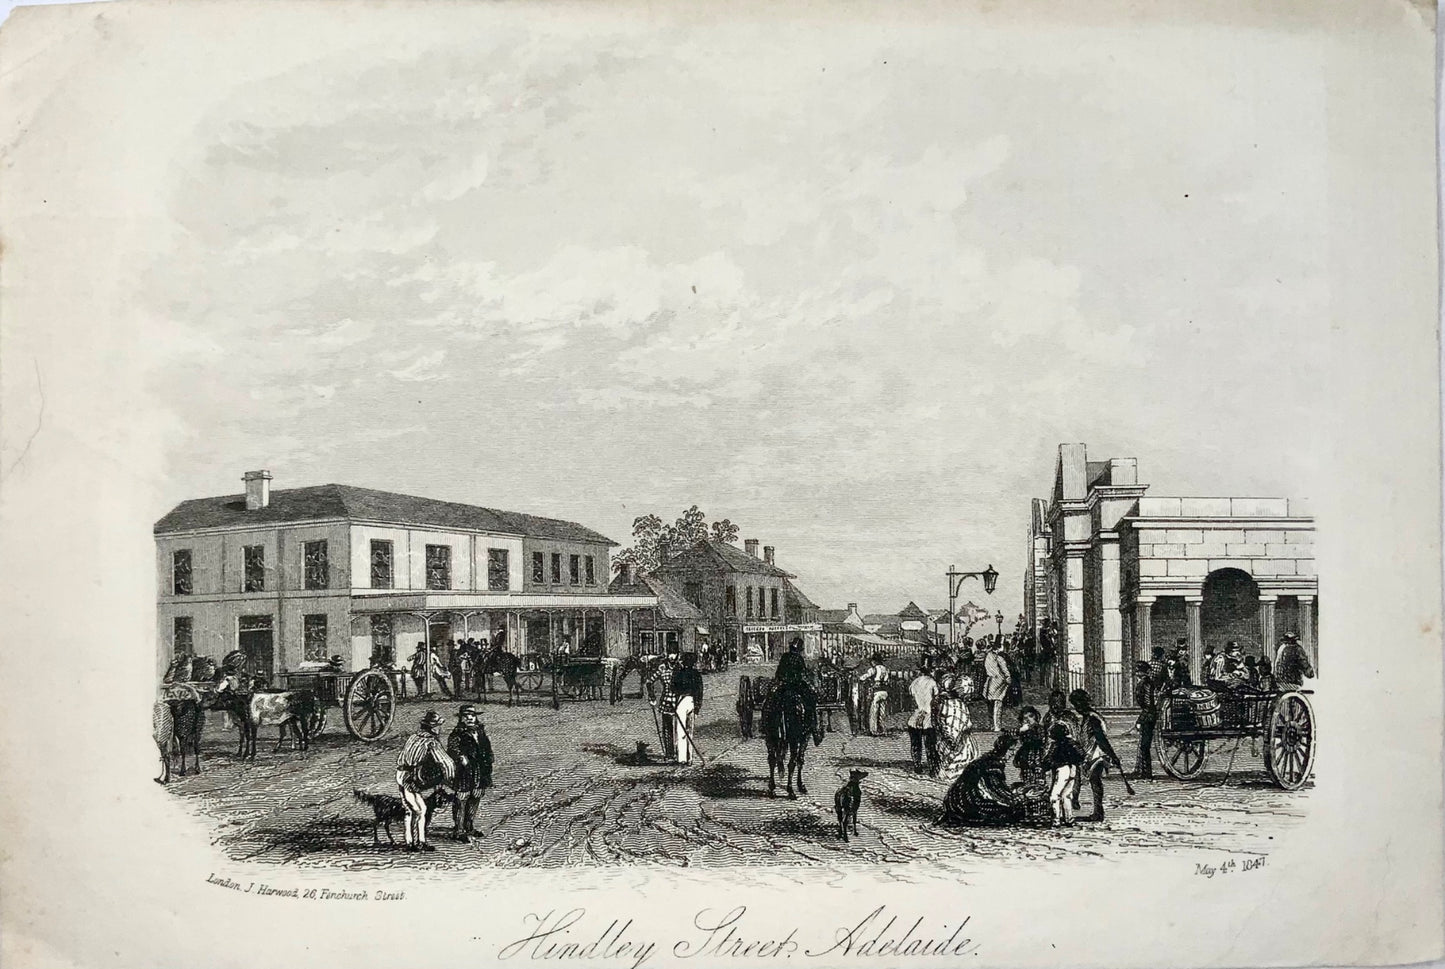 1847 Harwood, Hindley Street, Adelaide, etching, rare, foreign topography